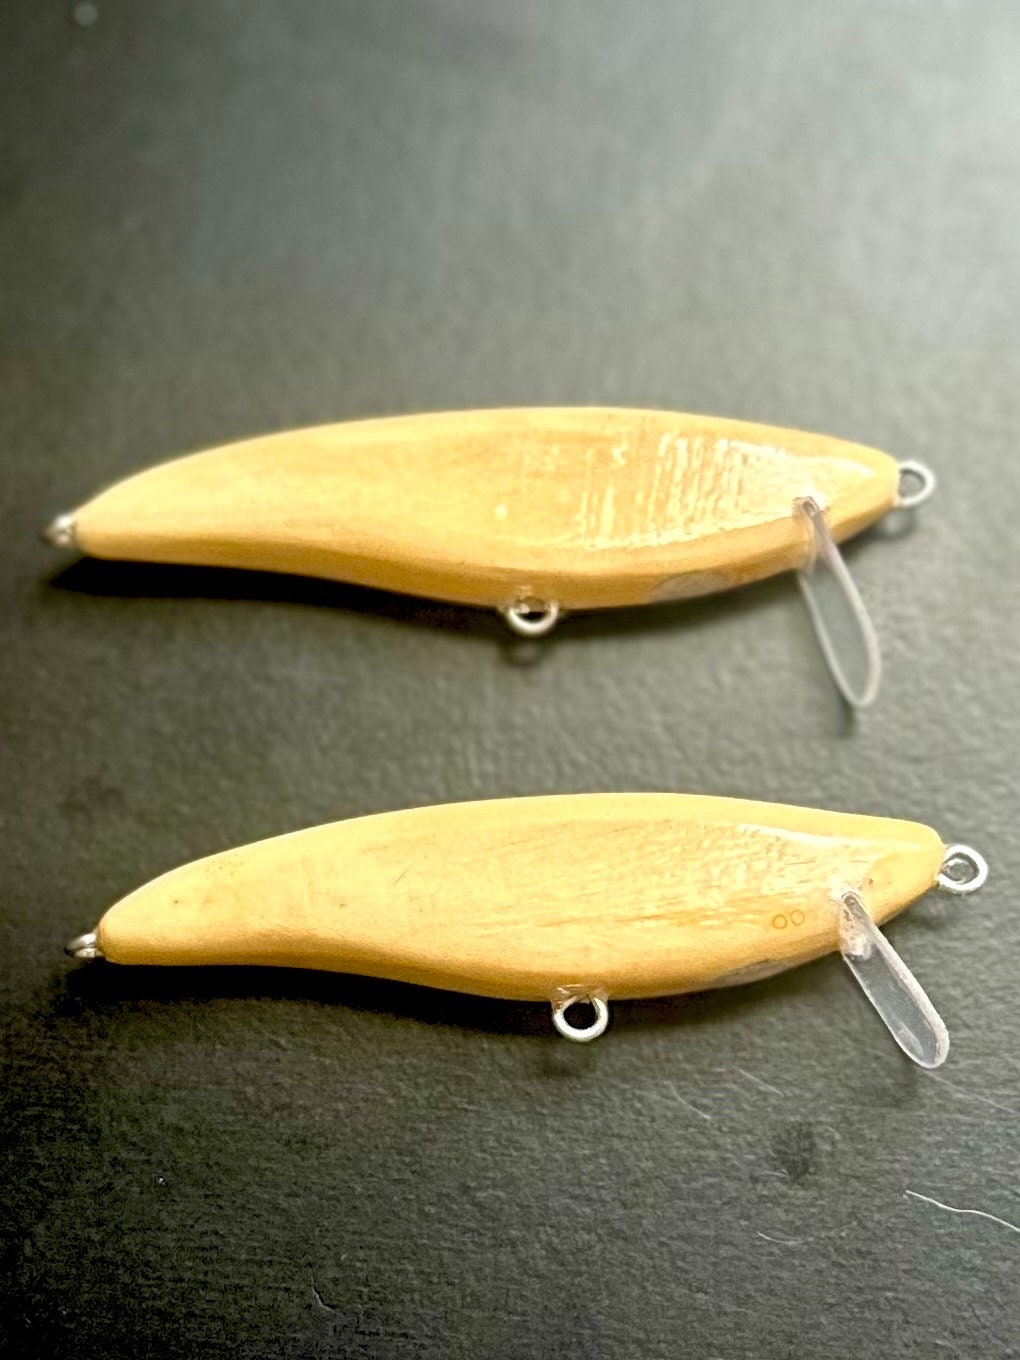 Crankbait Blanks Hand Carved From Wood Pack of 2 